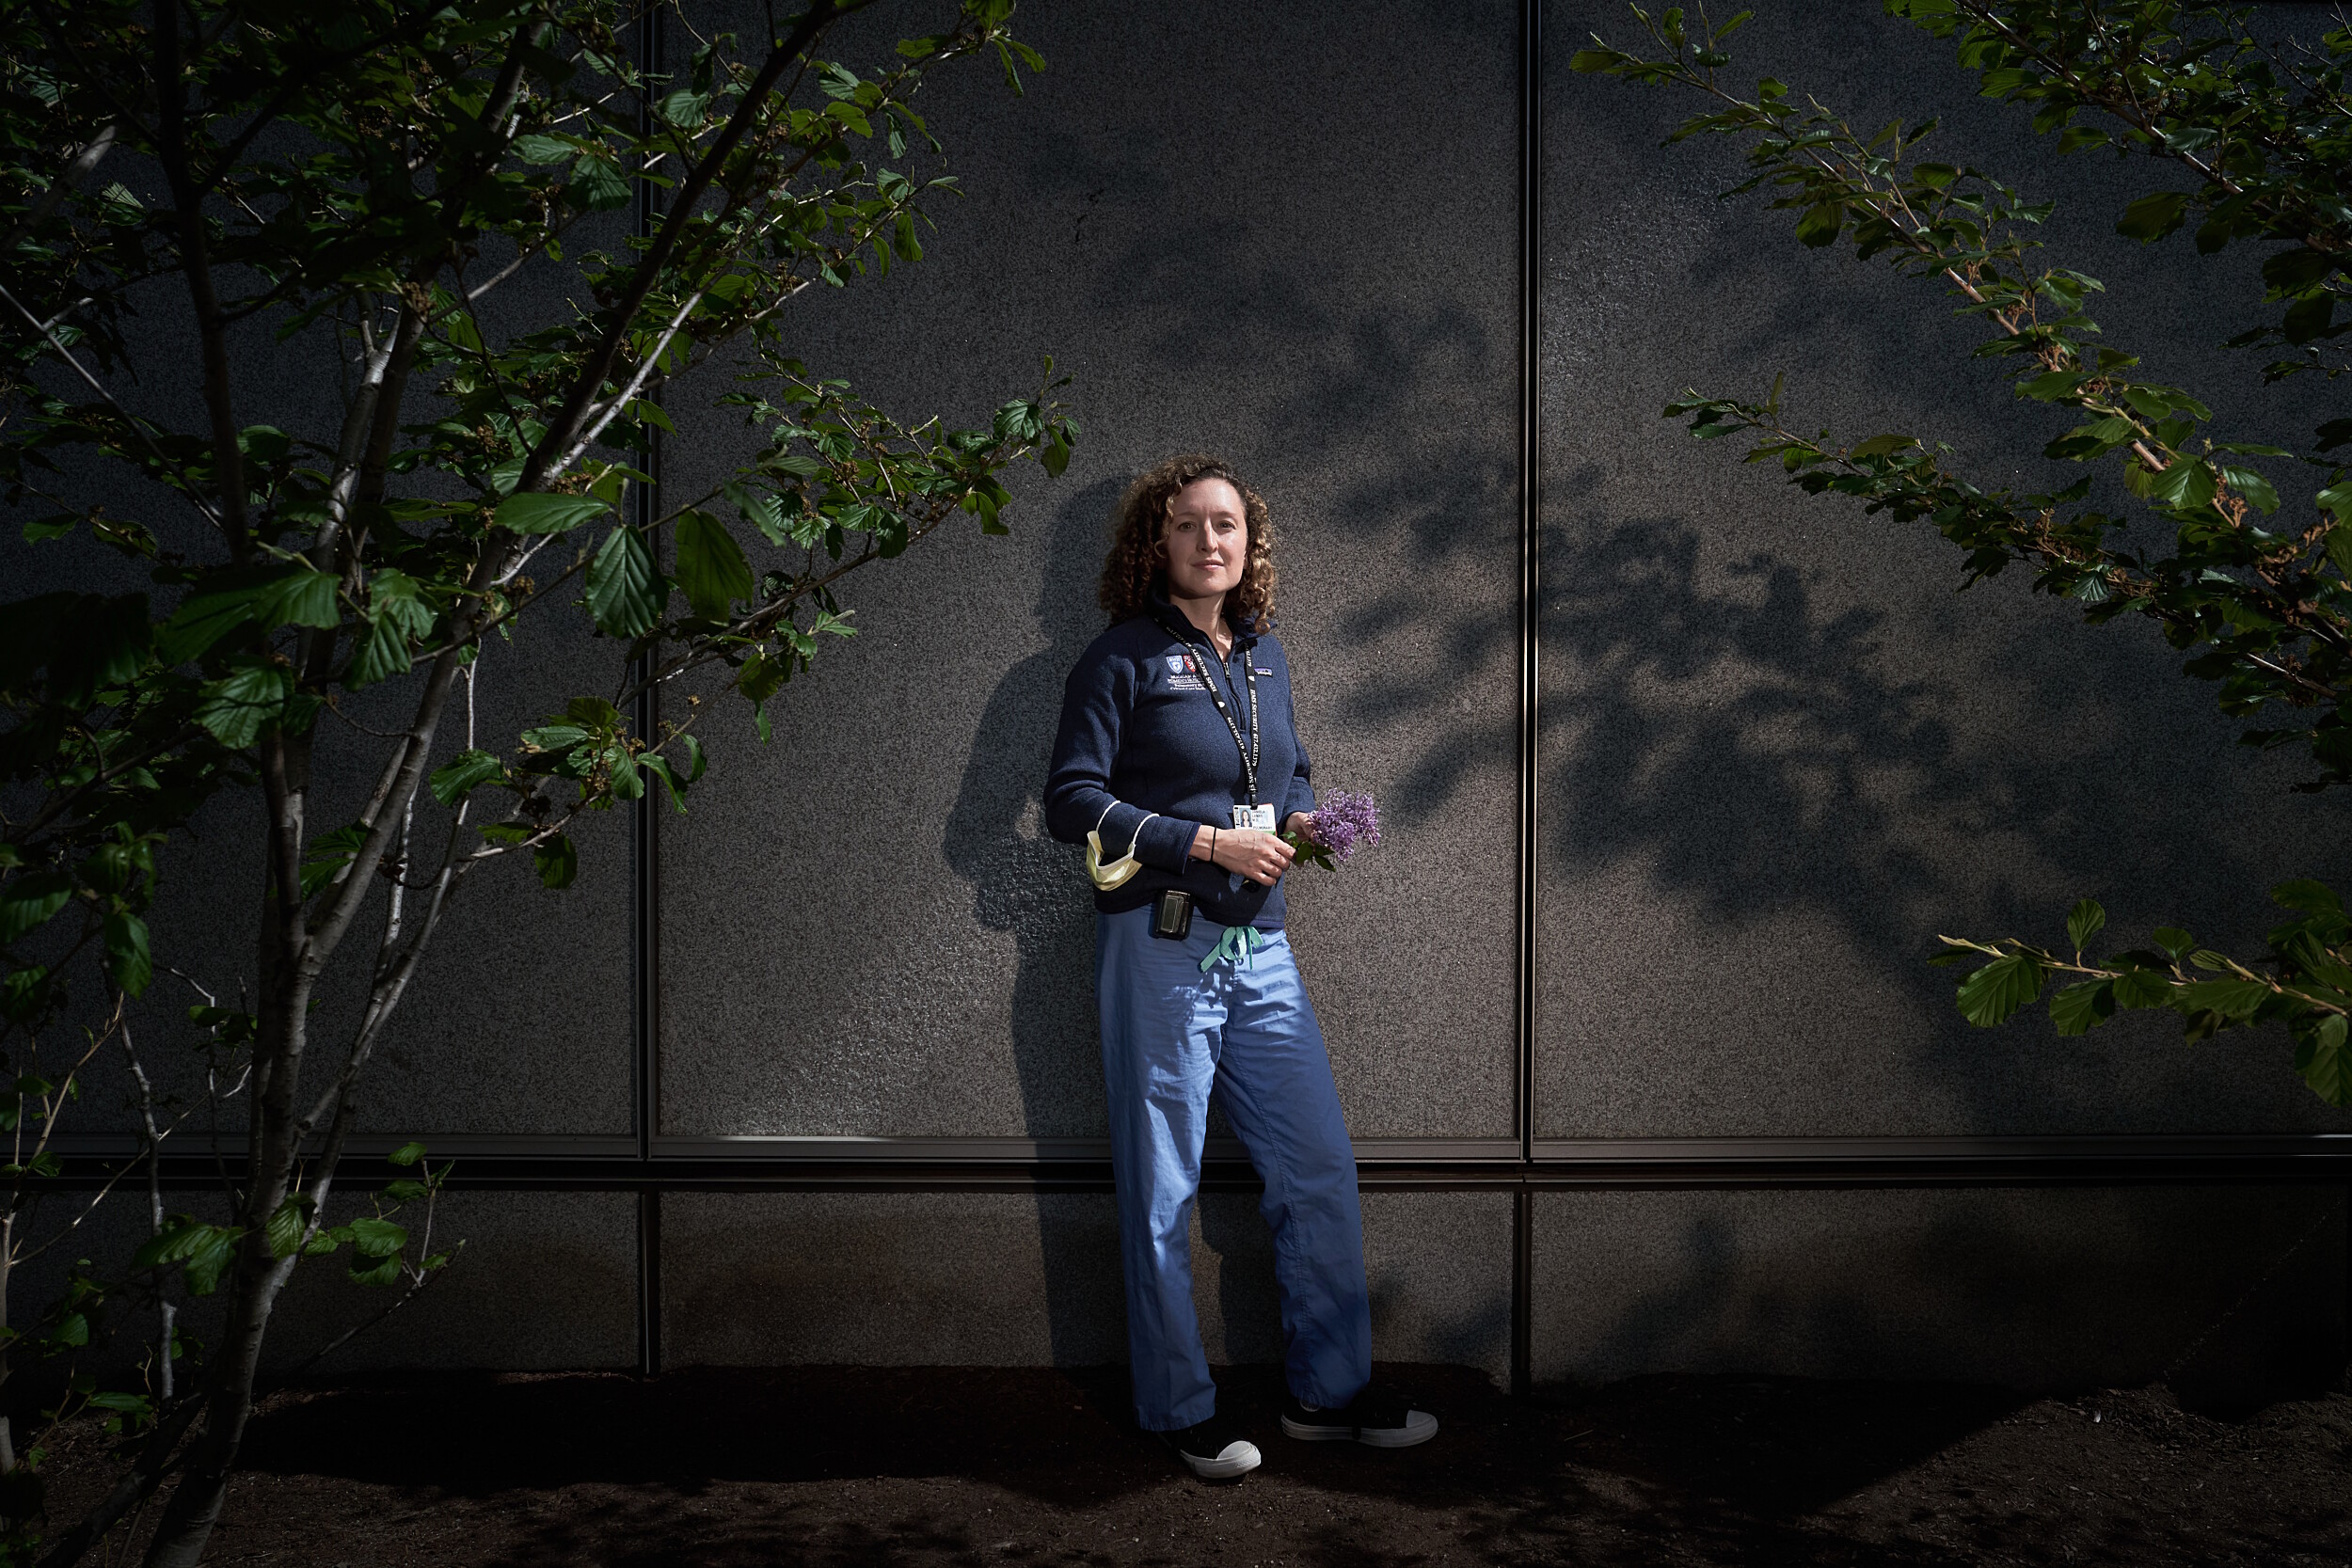 Dr. Daniela Lamas, a critical care doctor at Brigham and Women’s Hospital in Boston, For the New York Times.